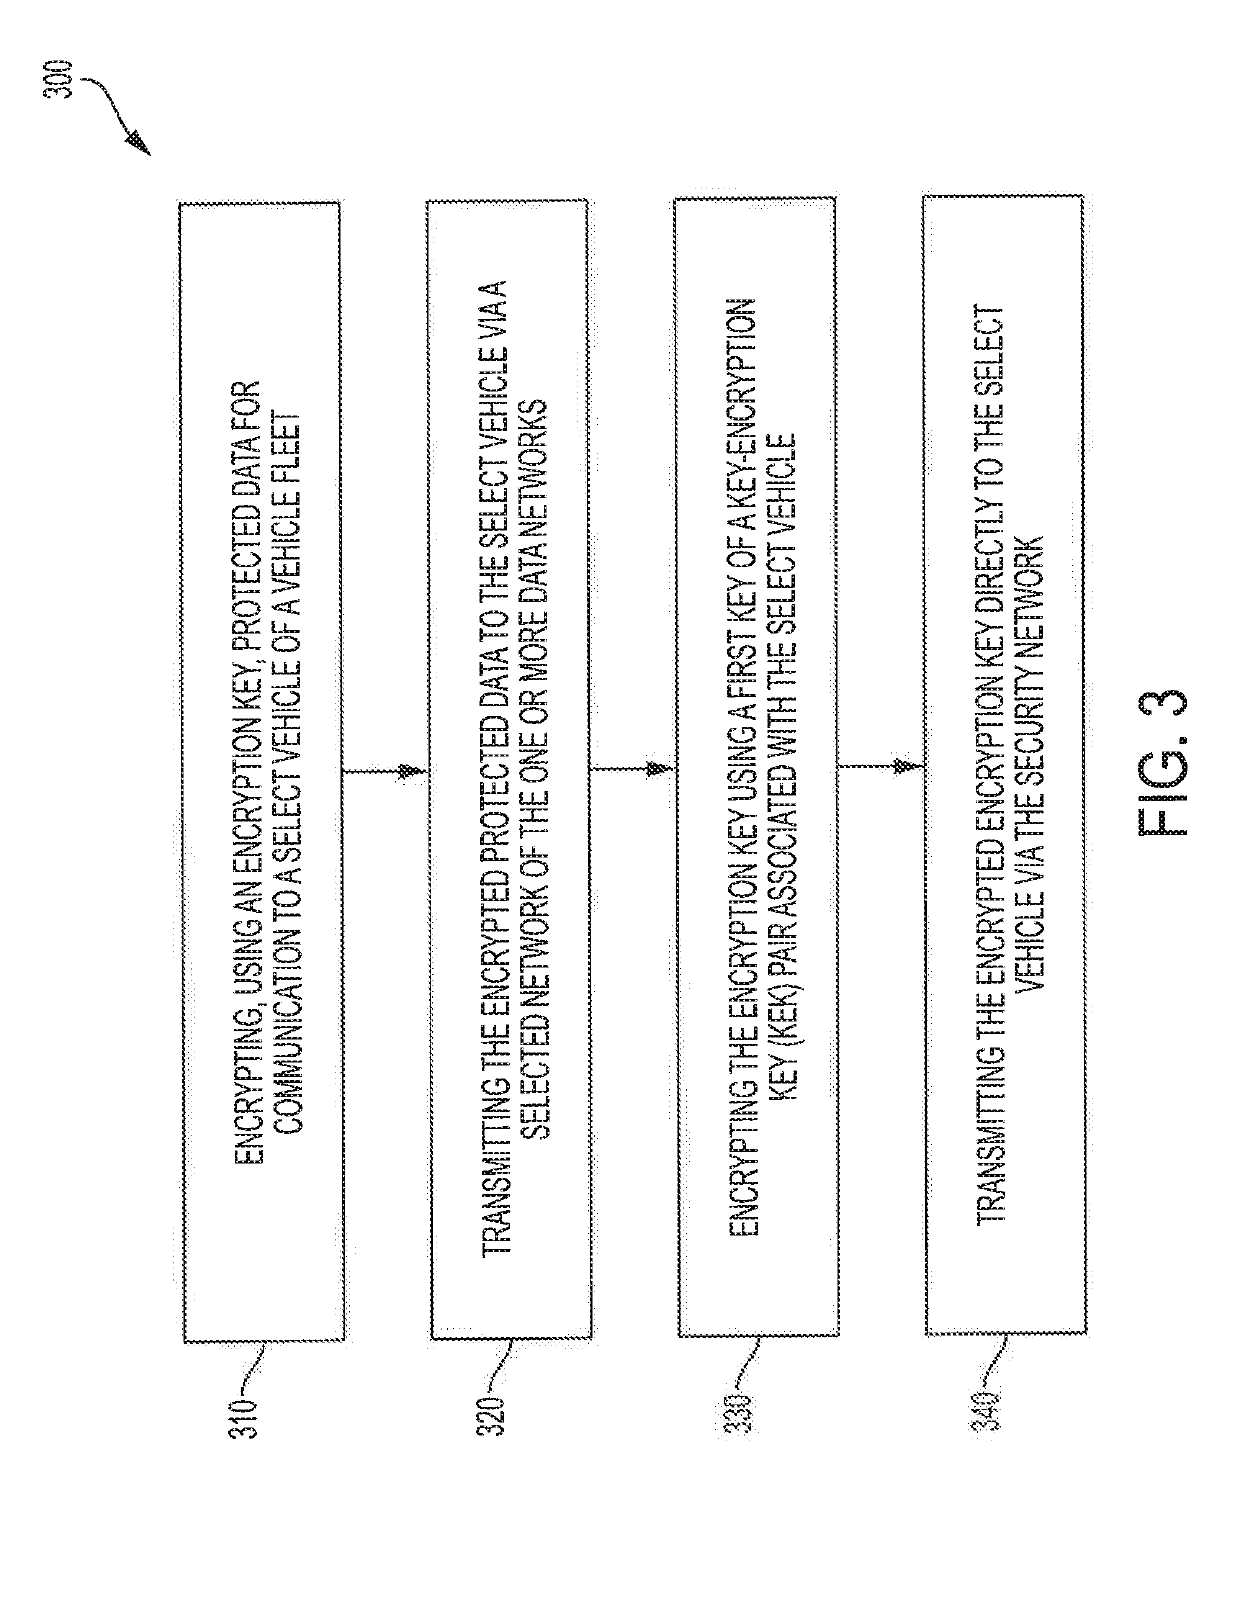 Systems and methods for using an out-of-band security channel for enhancing secure interactions with automotive electronic control units